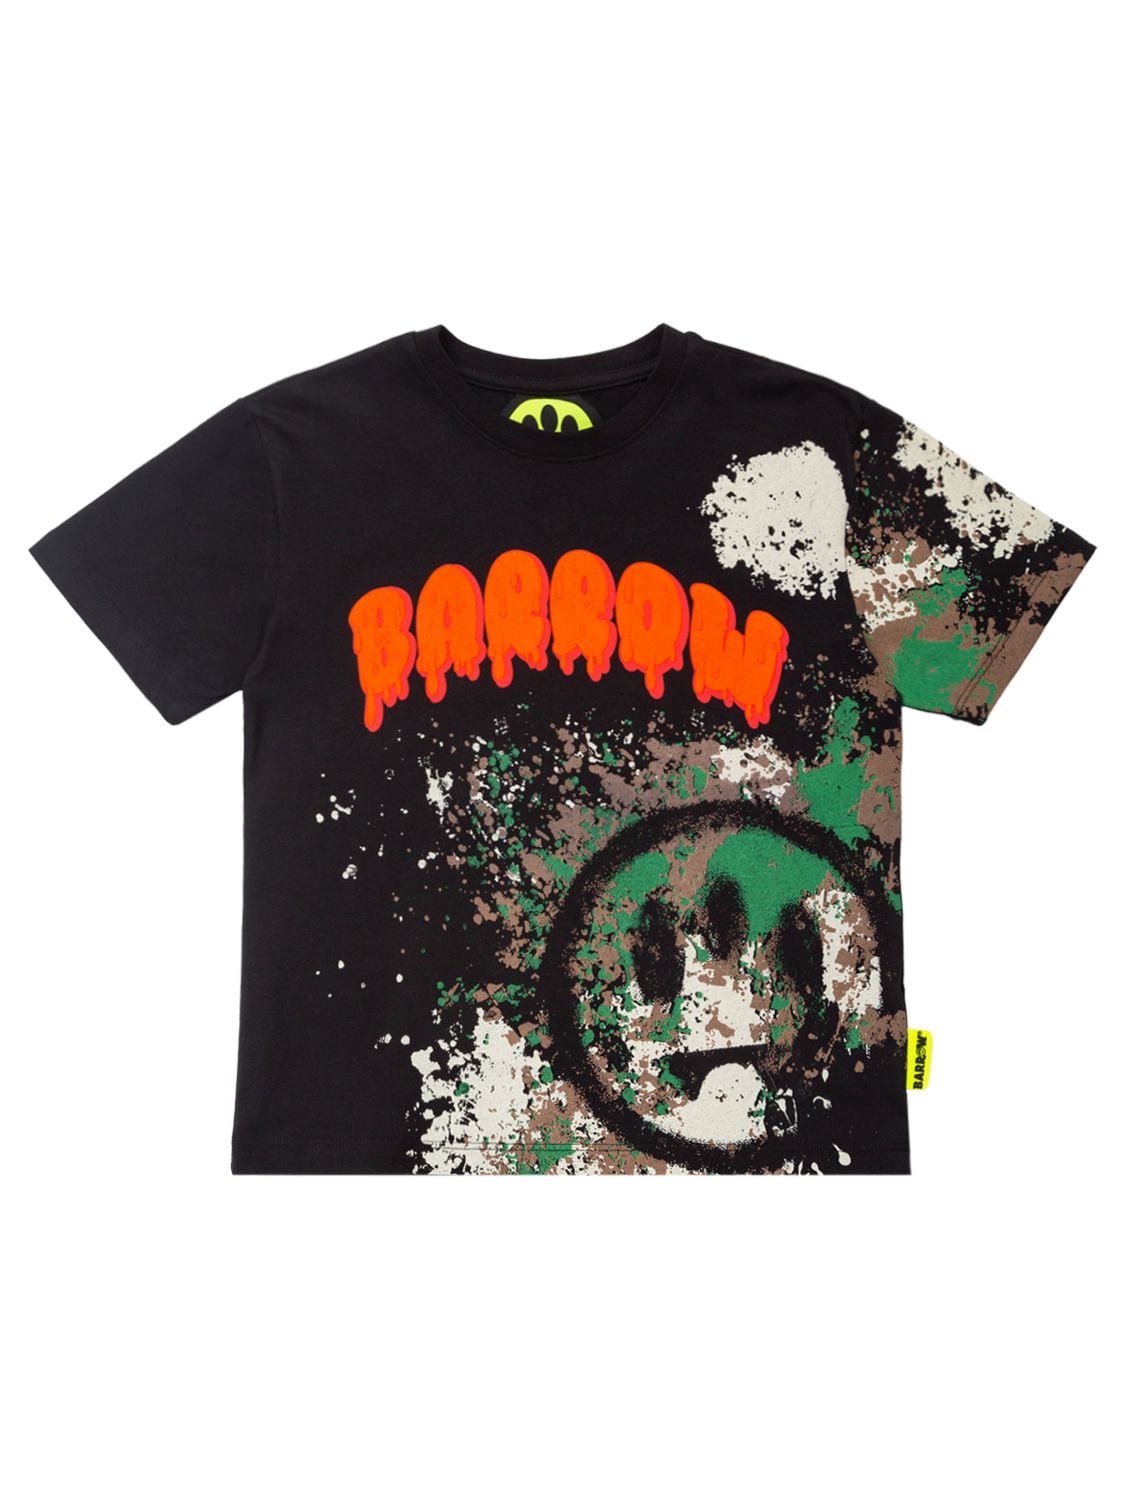 Barrow Kids' Printed Cotton Jersey S/s T-shirt In Black